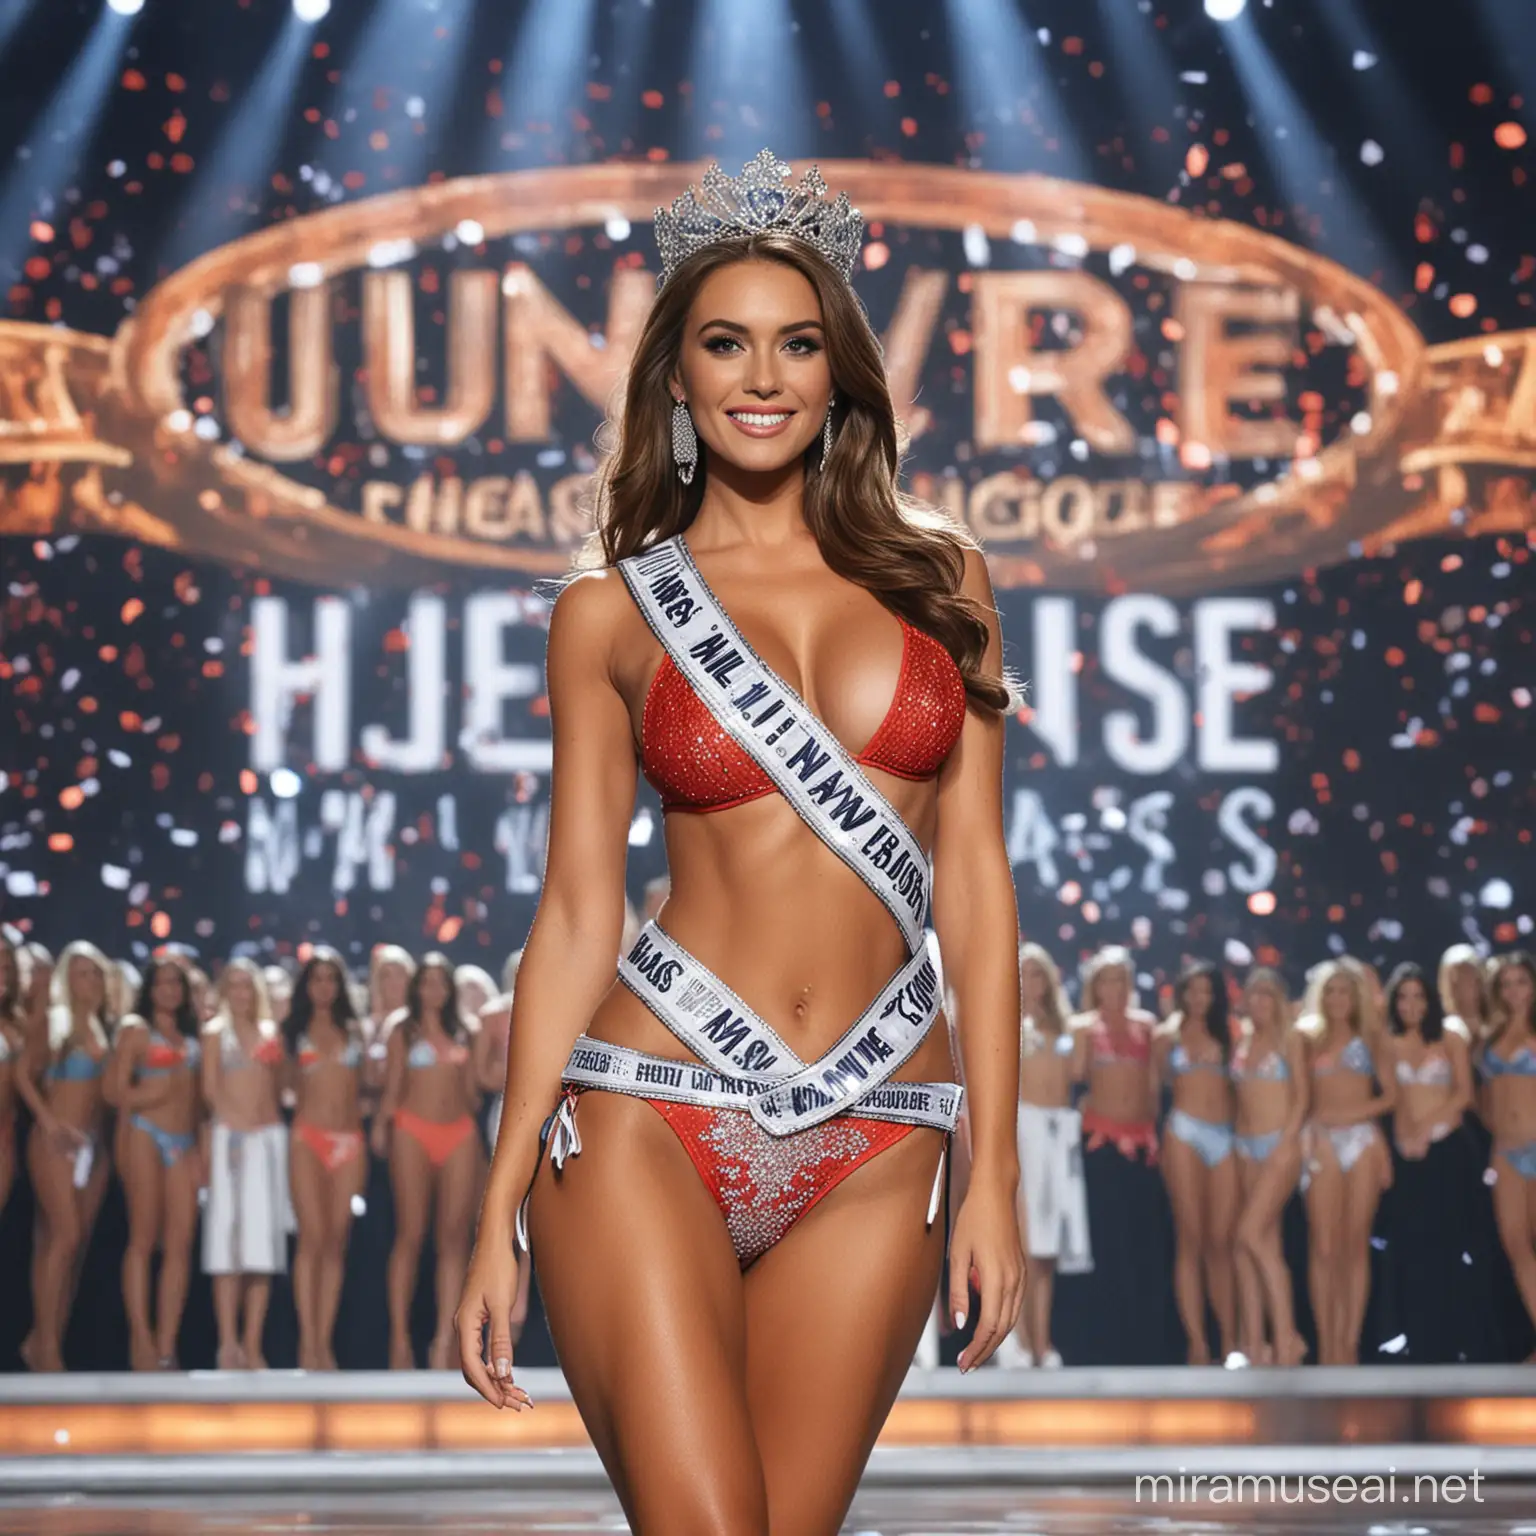 Holland's beautiful Miss Universe wears a bikini with a sash that says Hafiz with a magnificent stage in the background